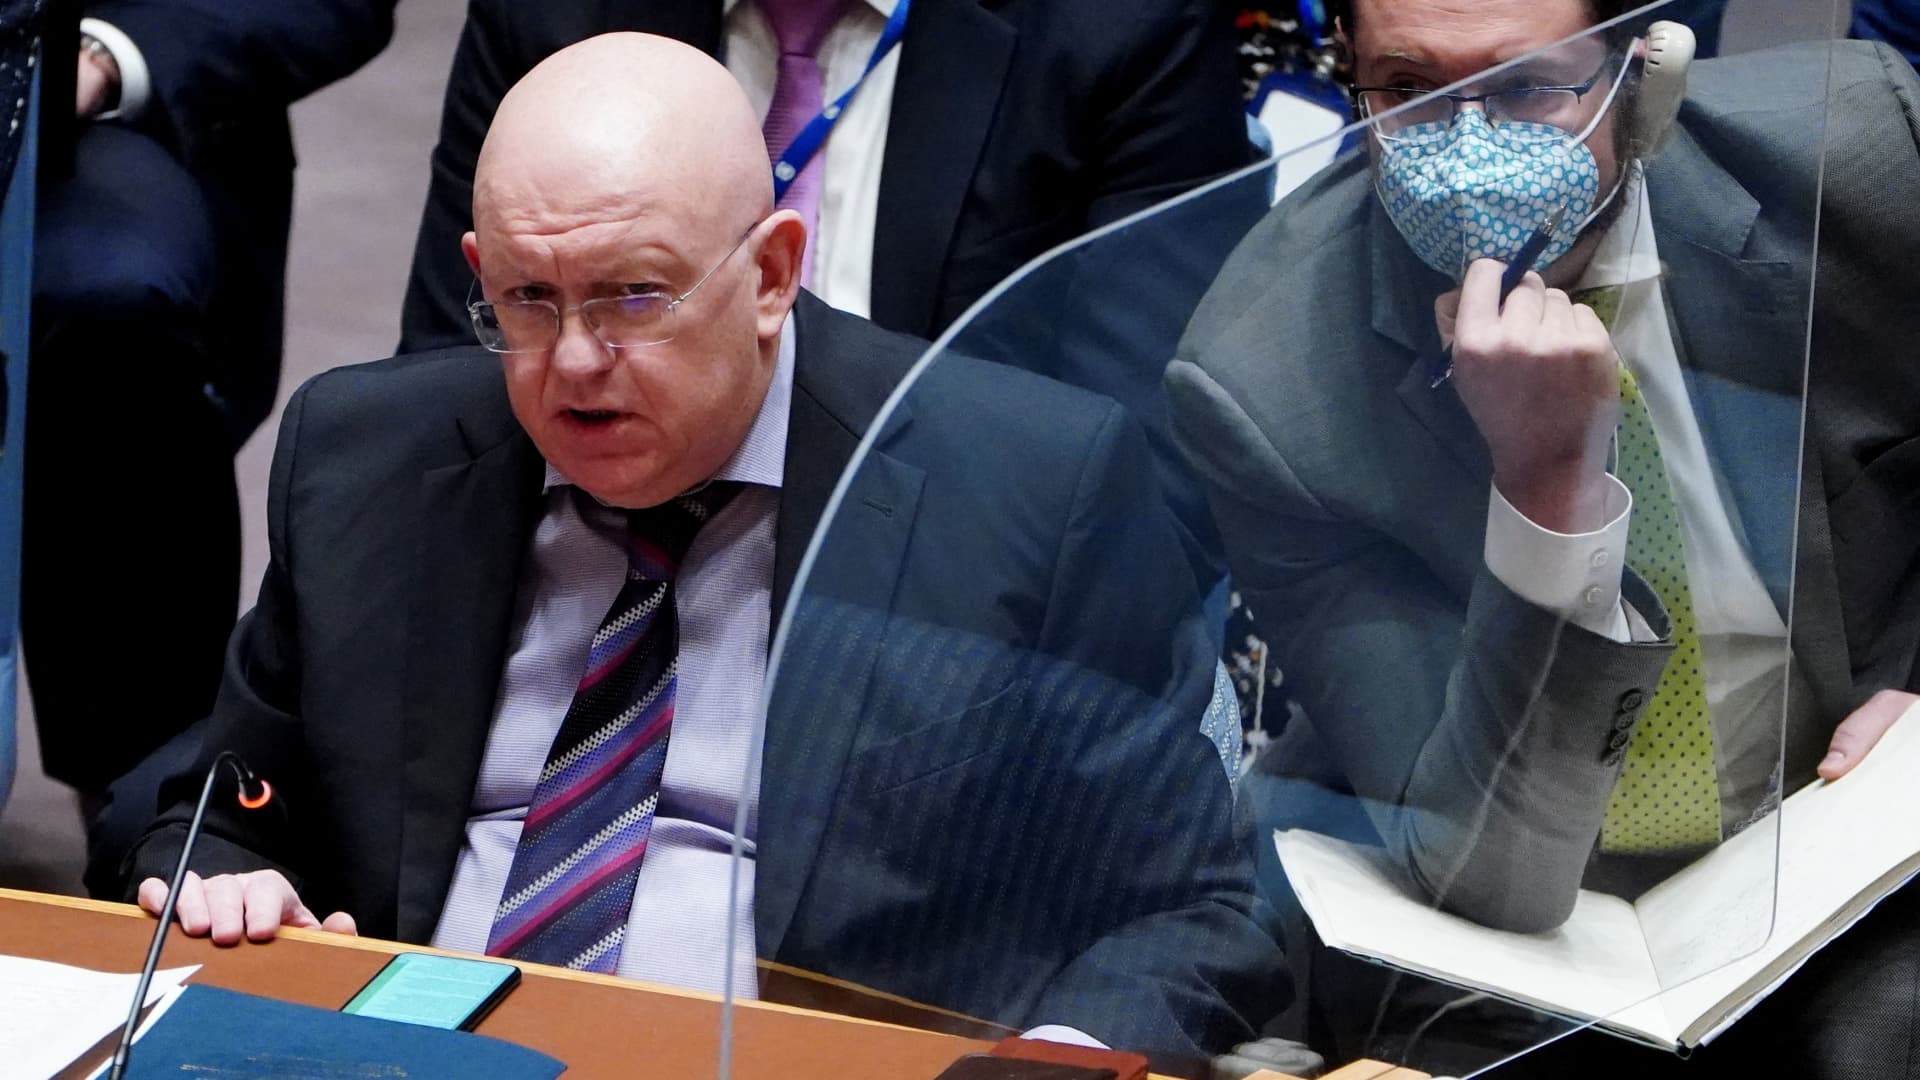 Russia's Ambassador to the UN Vassily Nebenzia speaks as he attends a meeting of the United Nations Security Council on Threats to International Peace and Security, following Russia's invasion of Ukraine, in New York City, U.S., March 7, 2022.